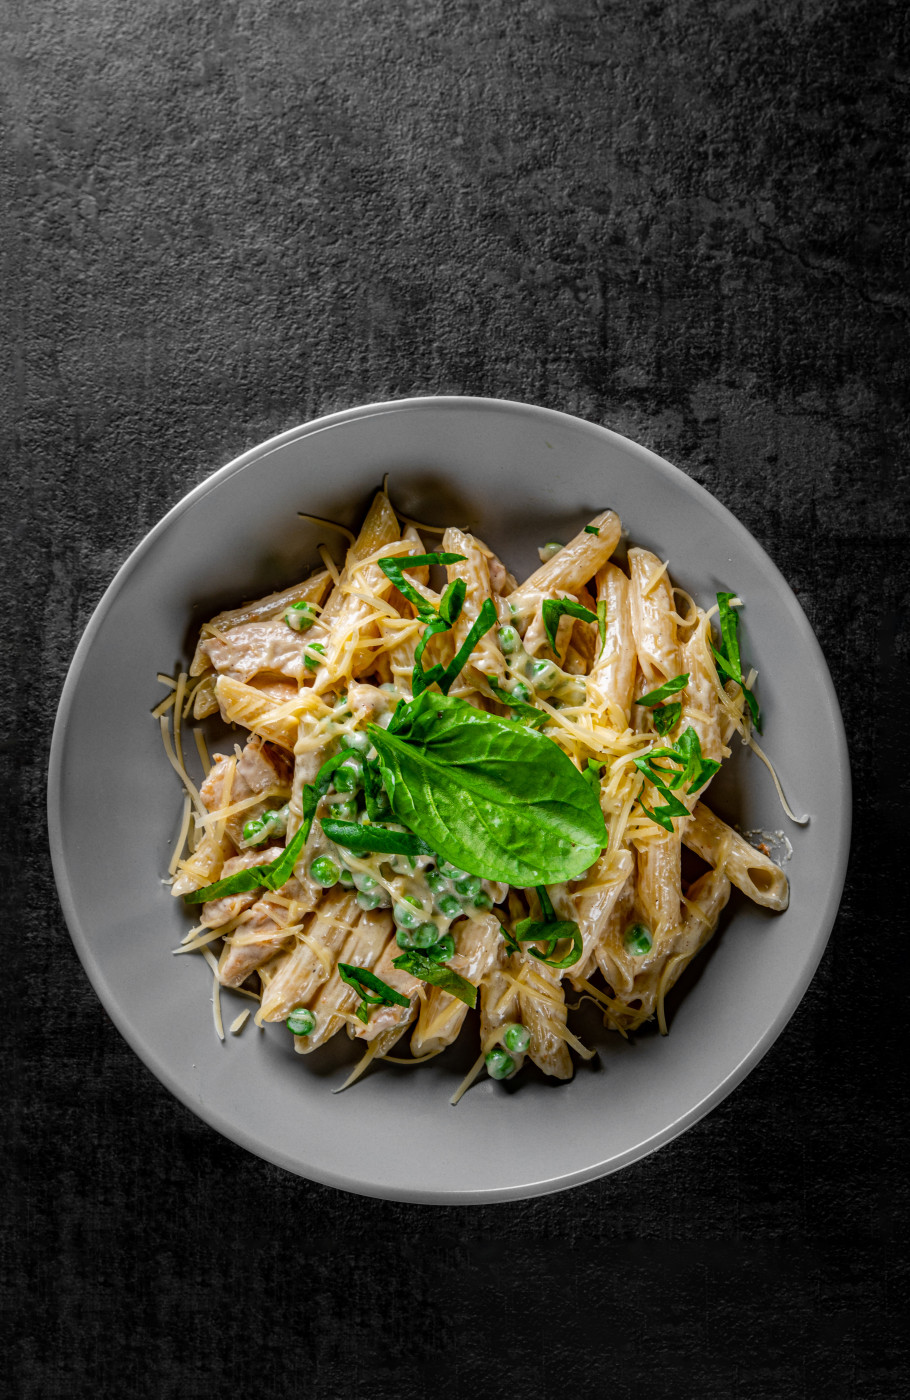 Pasta with Cheese and Basil